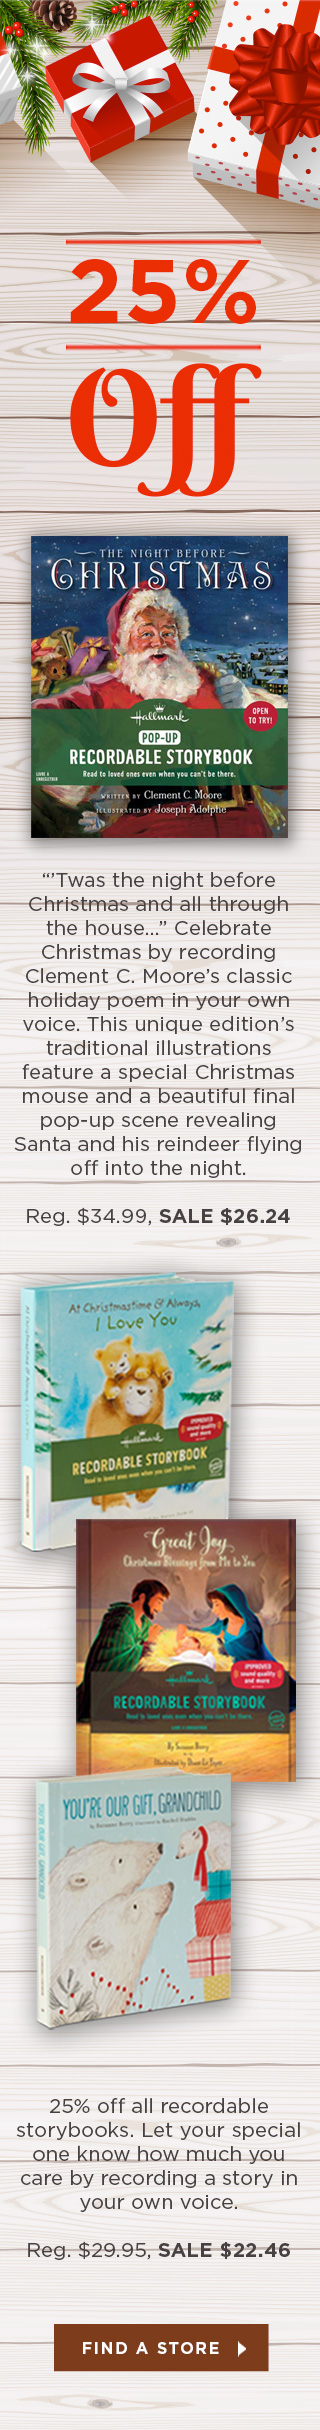 25% off sale on all recordable storybooks